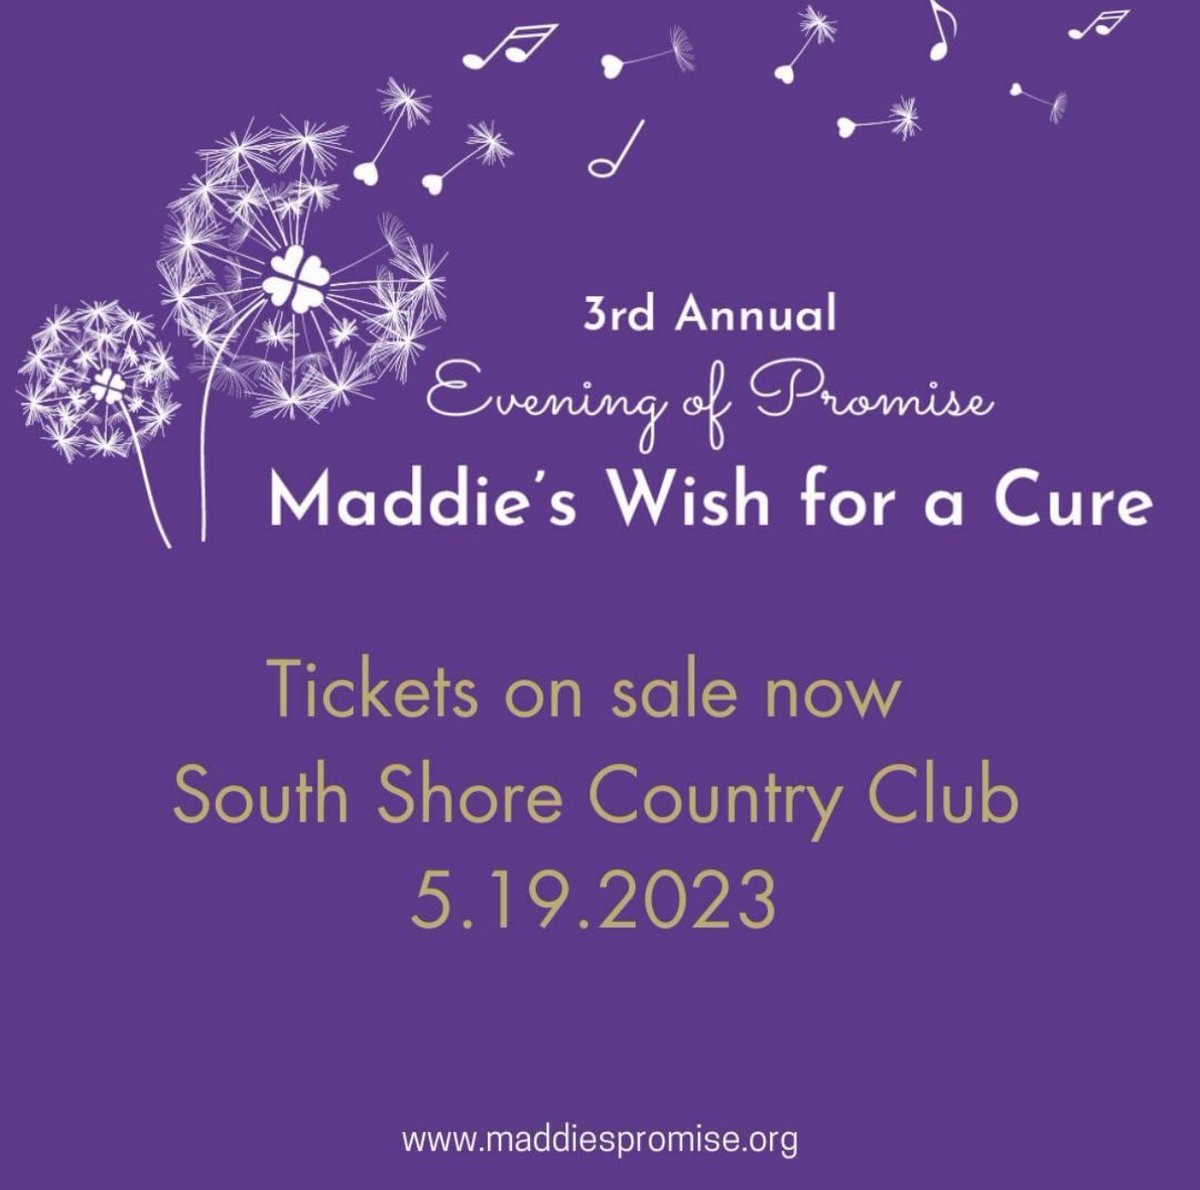 Join us as we come together to #bethechange #findthecure & fund impactful research for rare pediatric cancers like rhabdo.  Visit: maddiespromise.org/annual-gala-20…

#wishforacure #rhabdo #pediatriccancer #southshorema #beatchildhoodcancer #gala @NERevolution @SarcomaAlliance